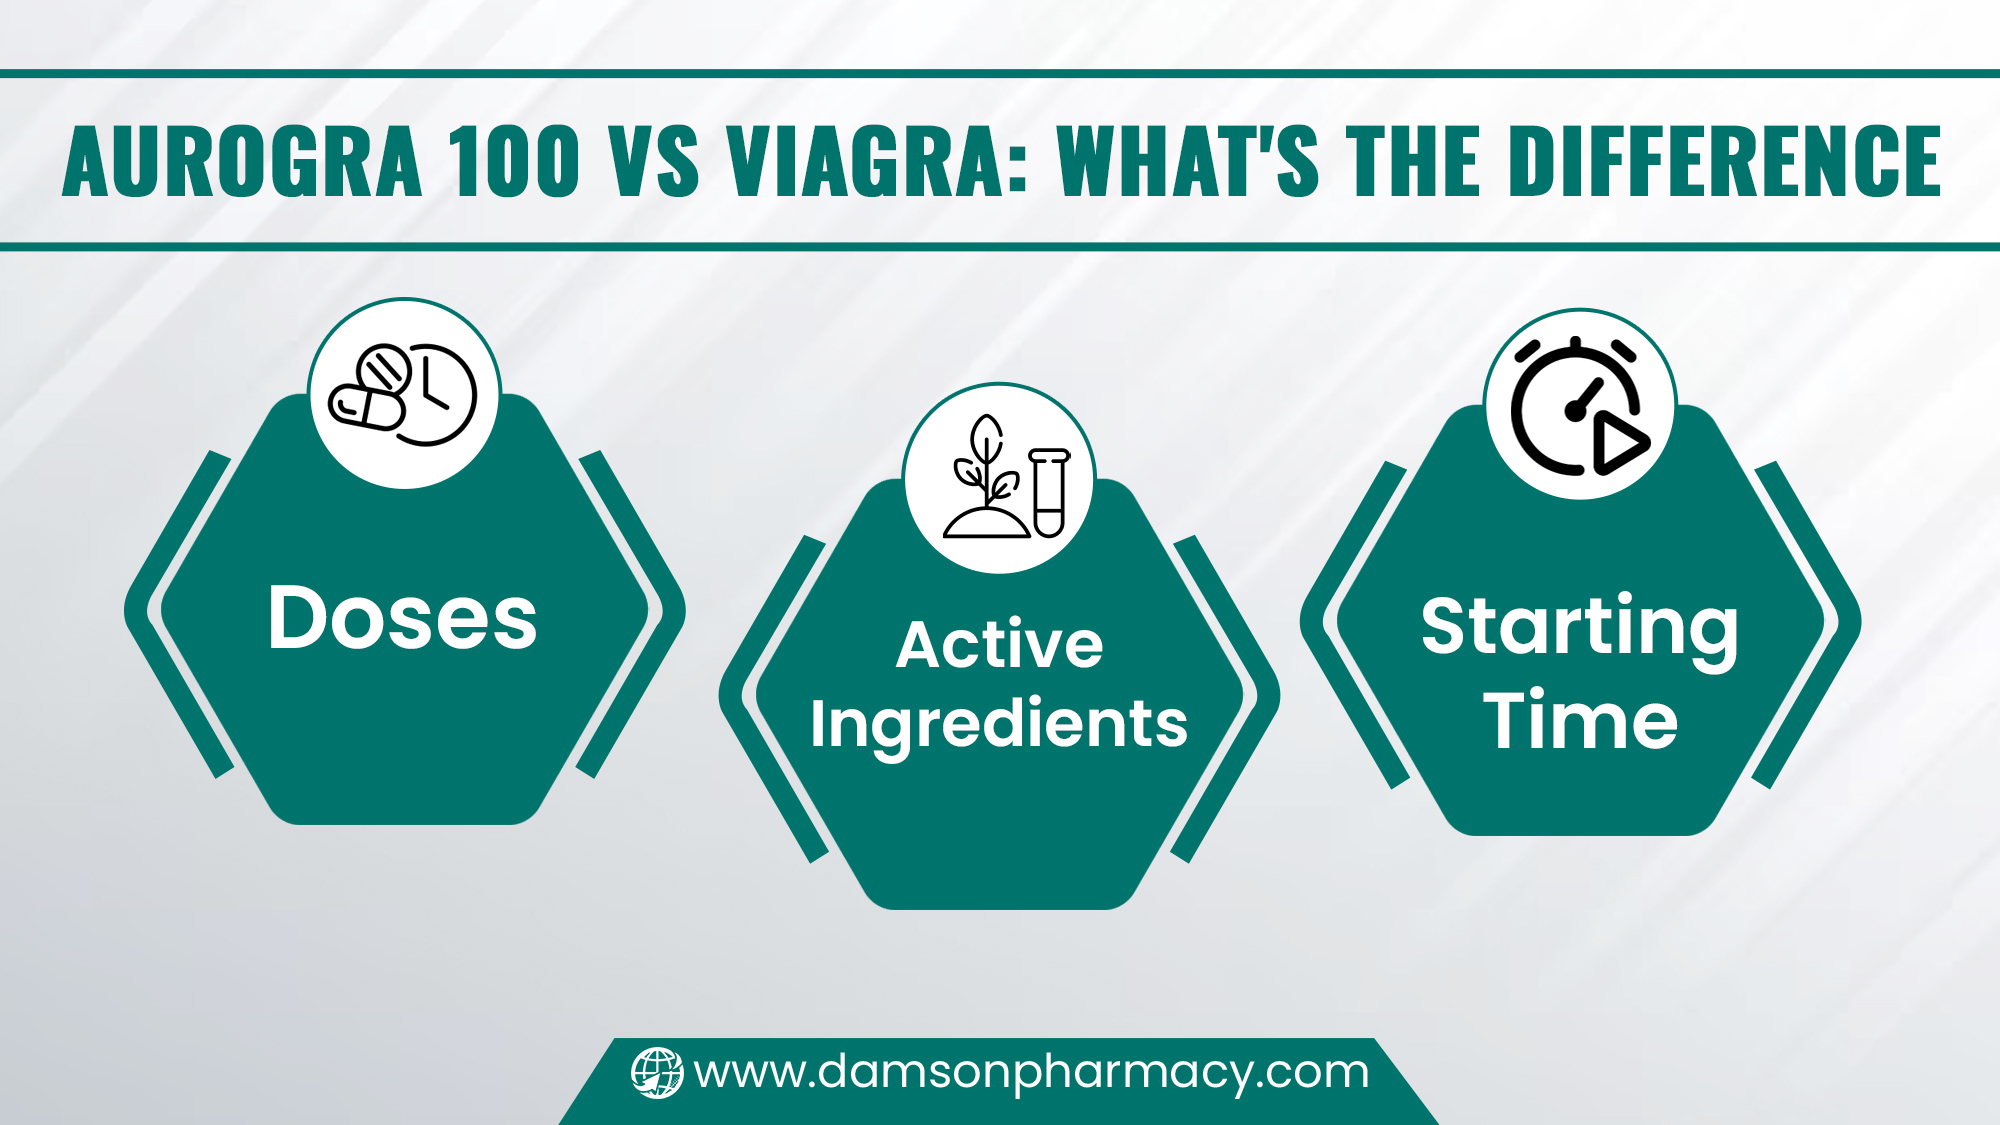 Aurogra 100 vs Viagra What's the Difference